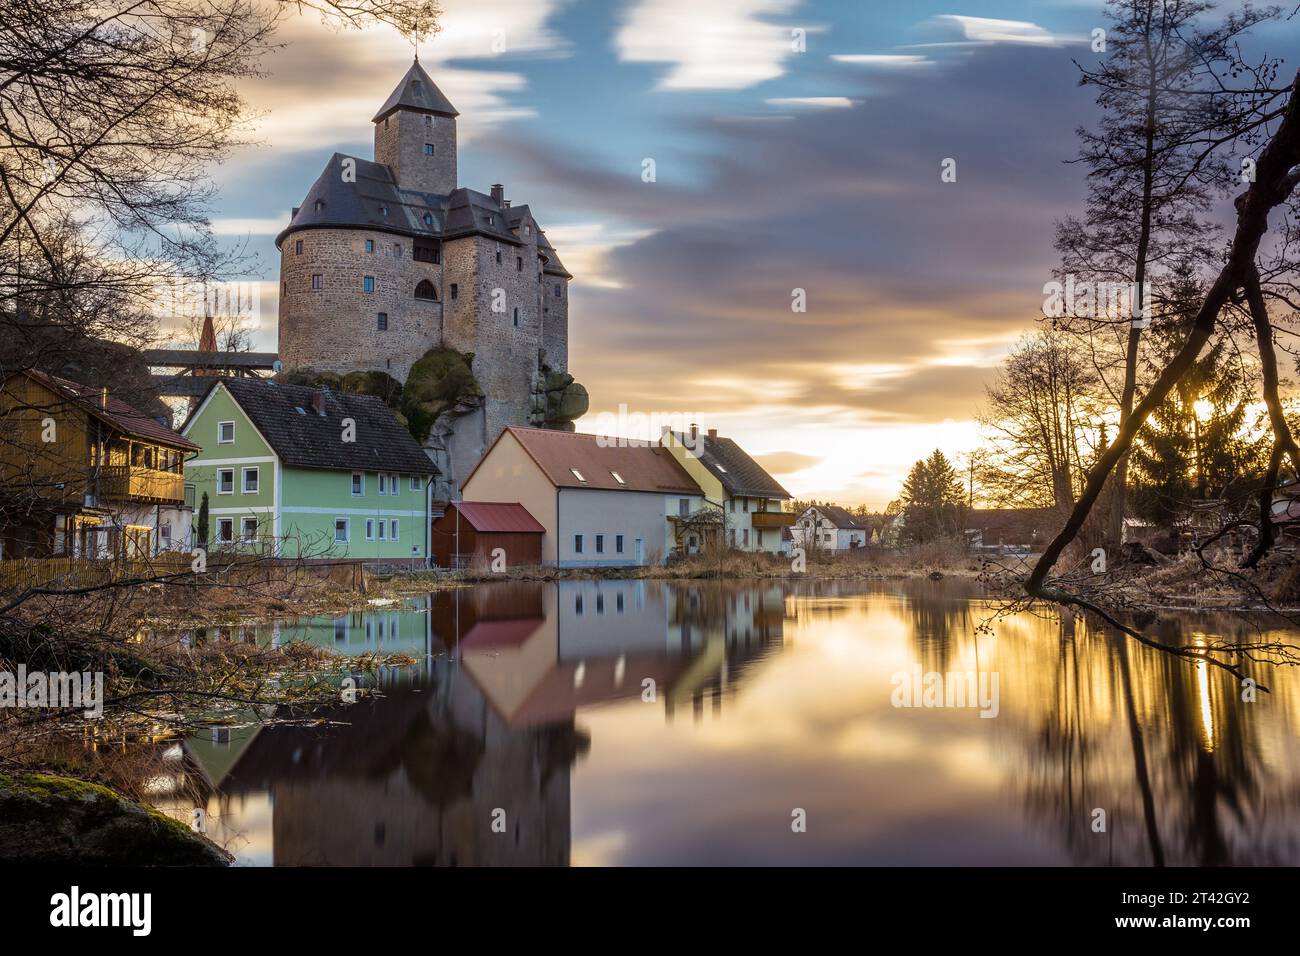 A stunning sunset over Falkenberg Fortress, a historic landmark located in Bavaria, Germany Stock Photo